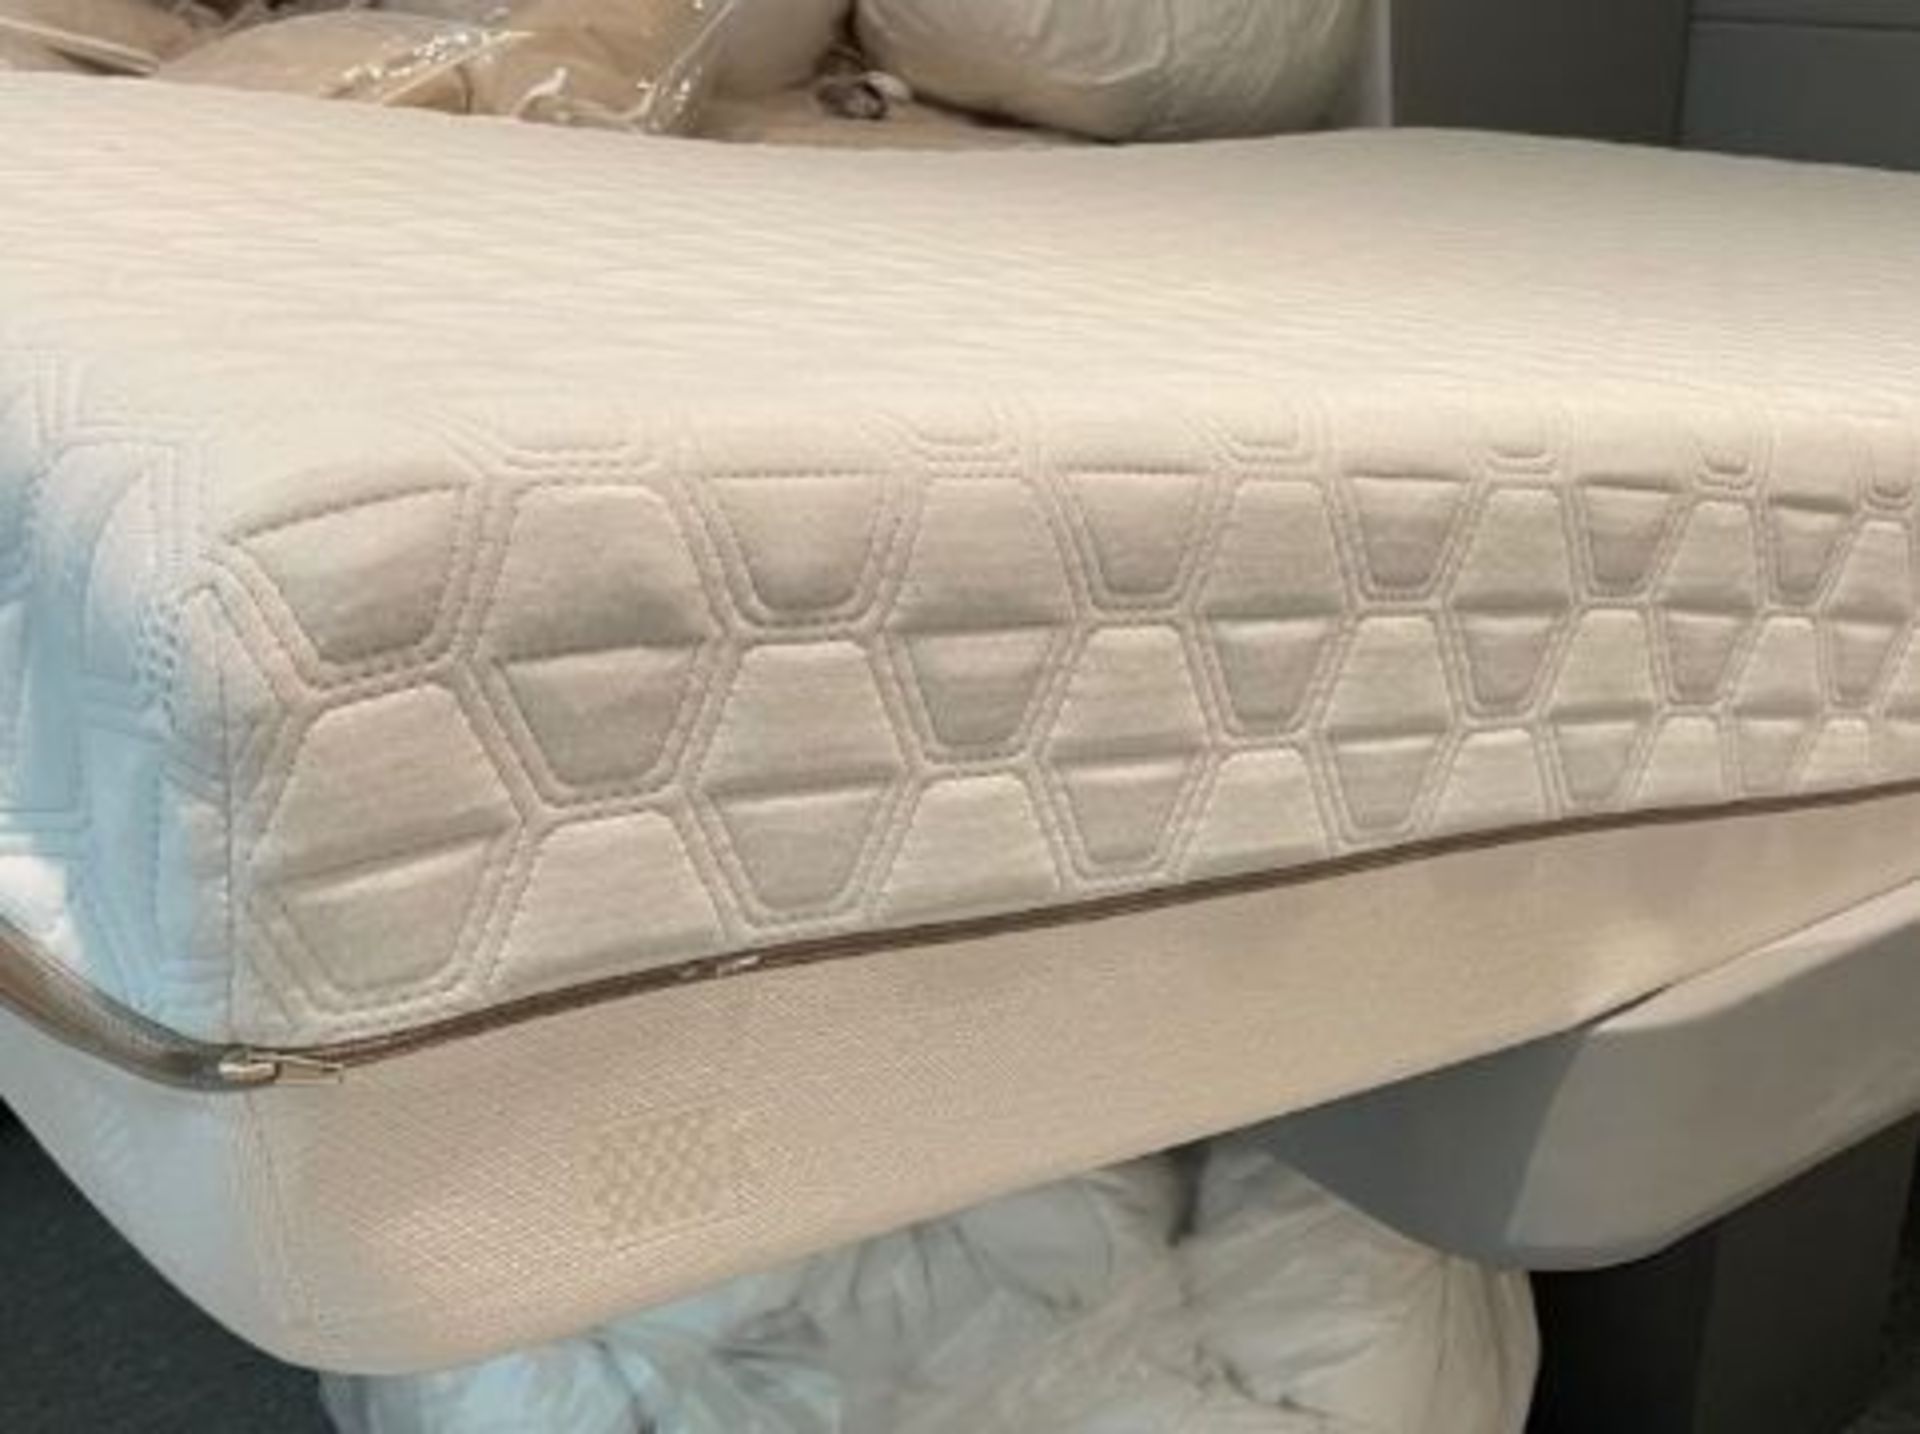 1 x Double Adjustable Space Saving Smart Bed With Serta Motion Memory Foam Mattress - Signature - Image 2 of 11